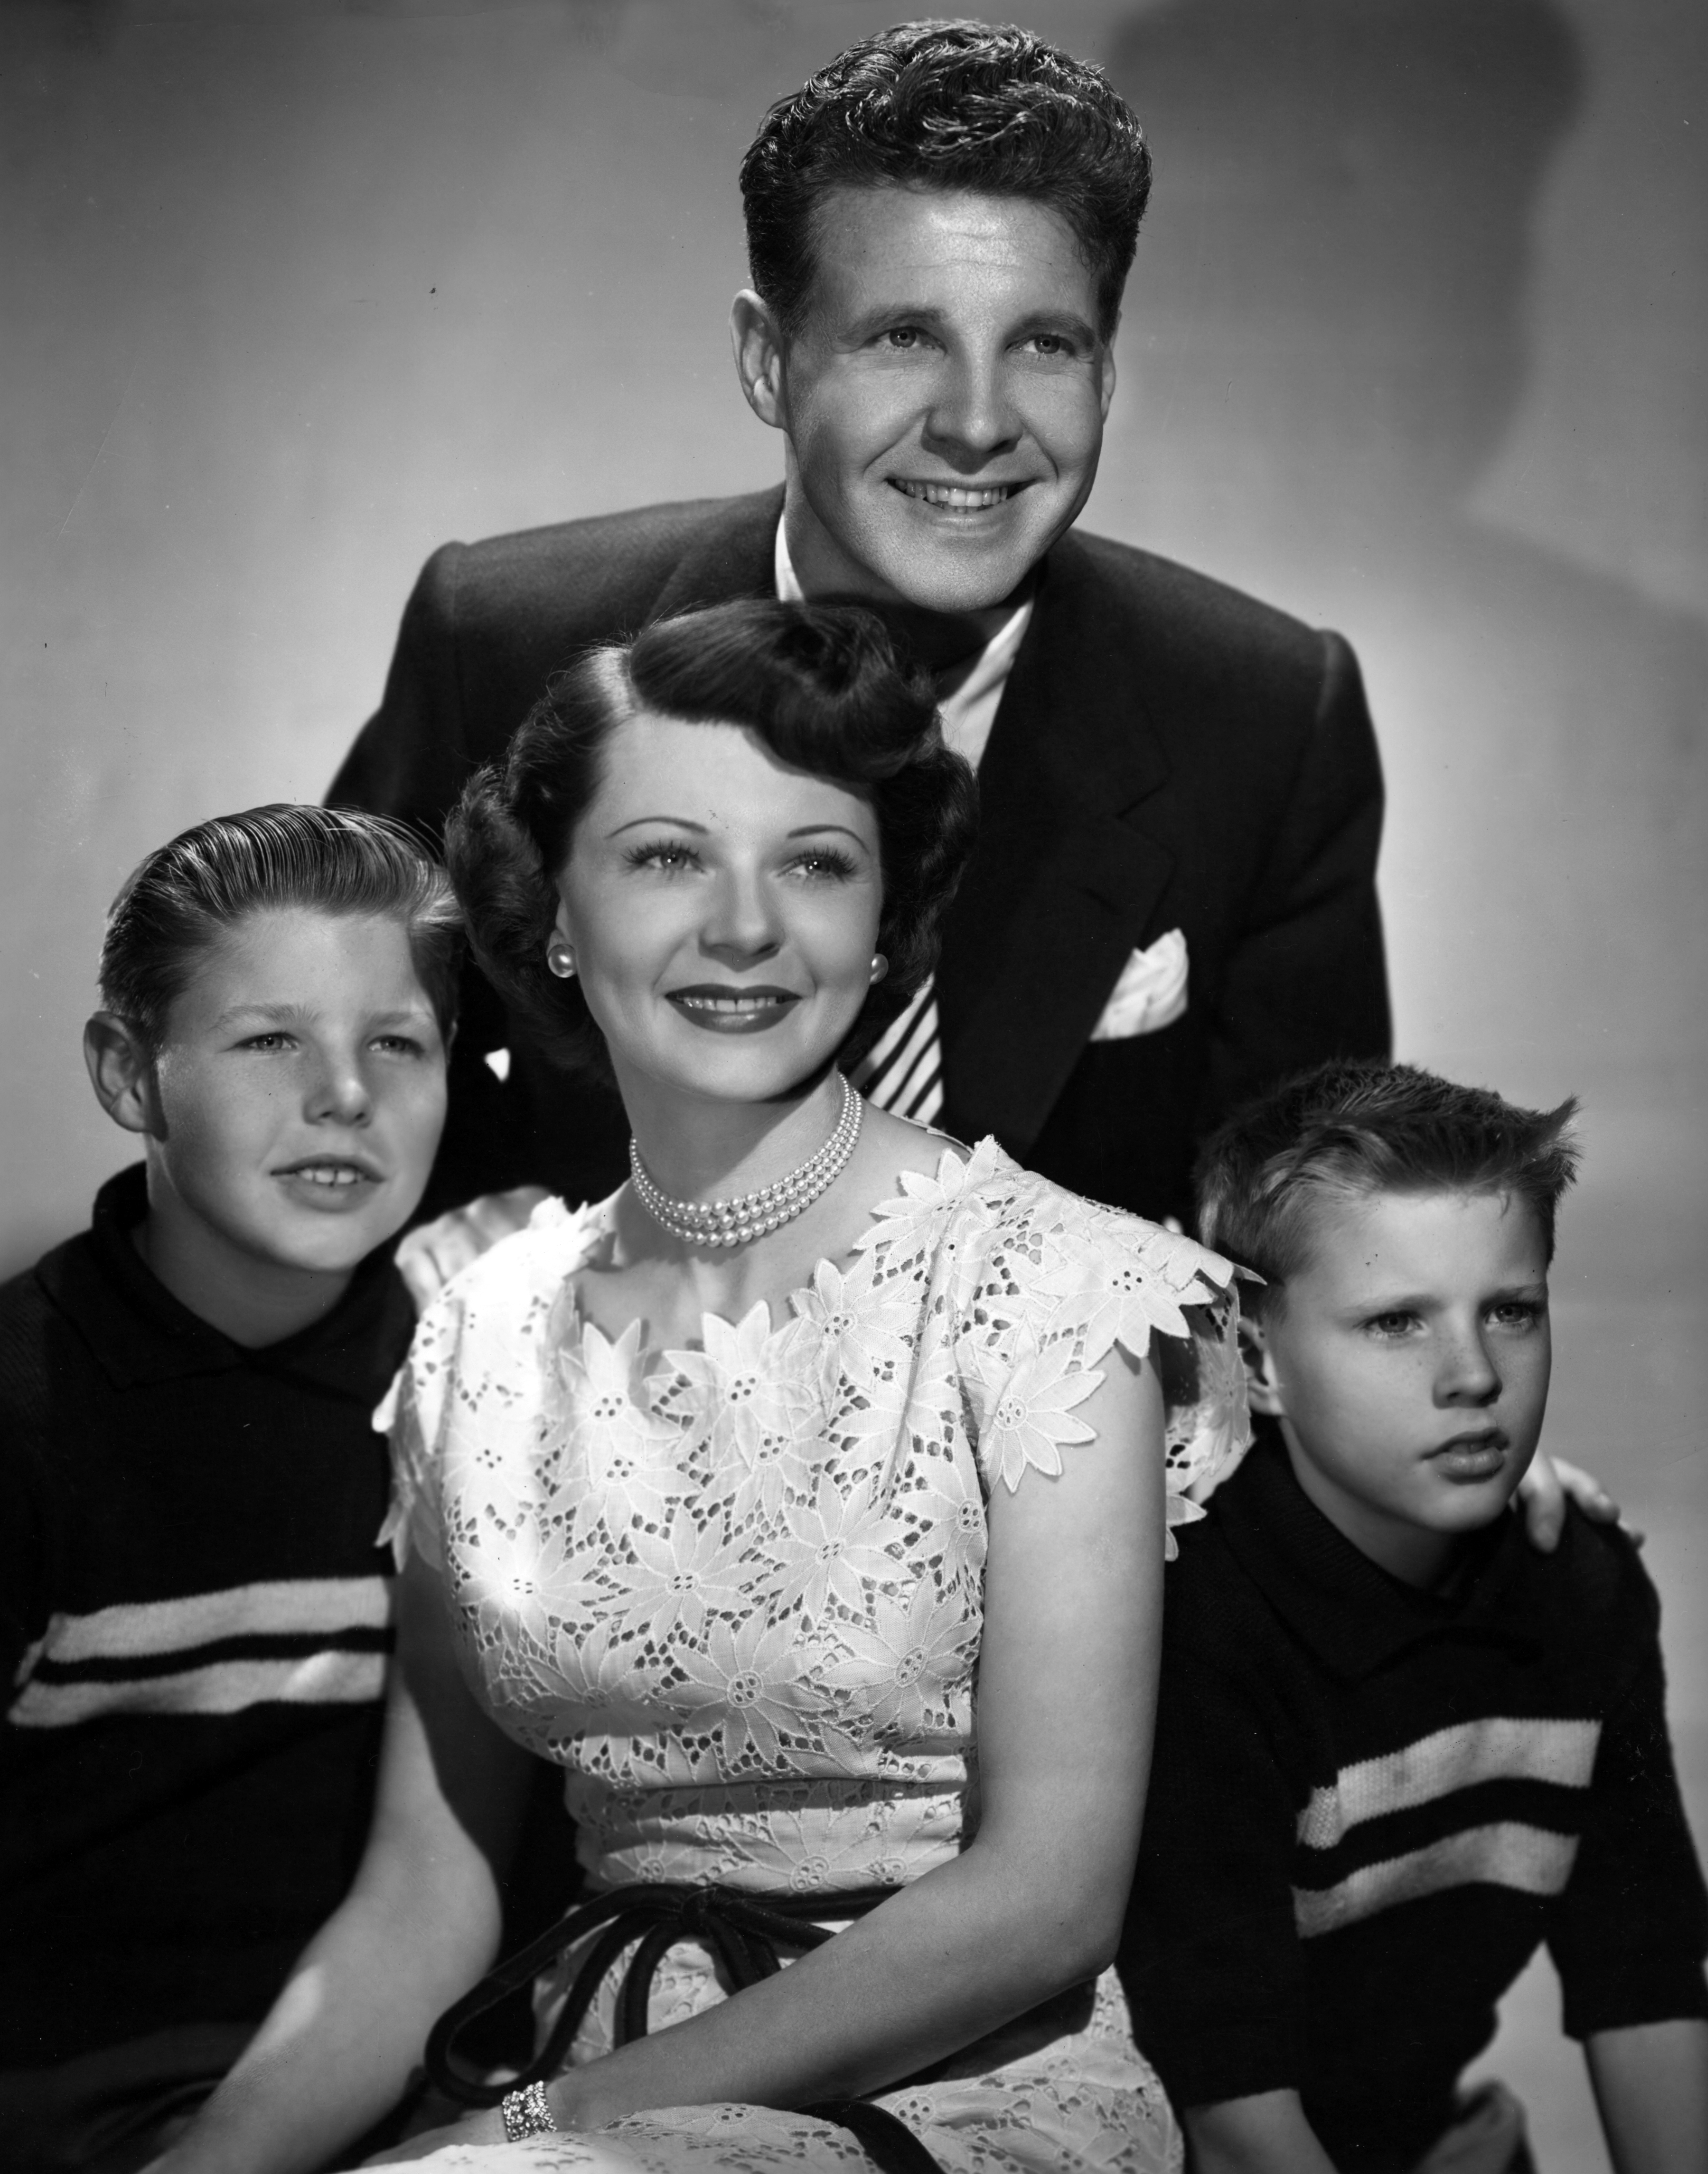 The singer's family portrait released in 1946 | Source: Getty Images